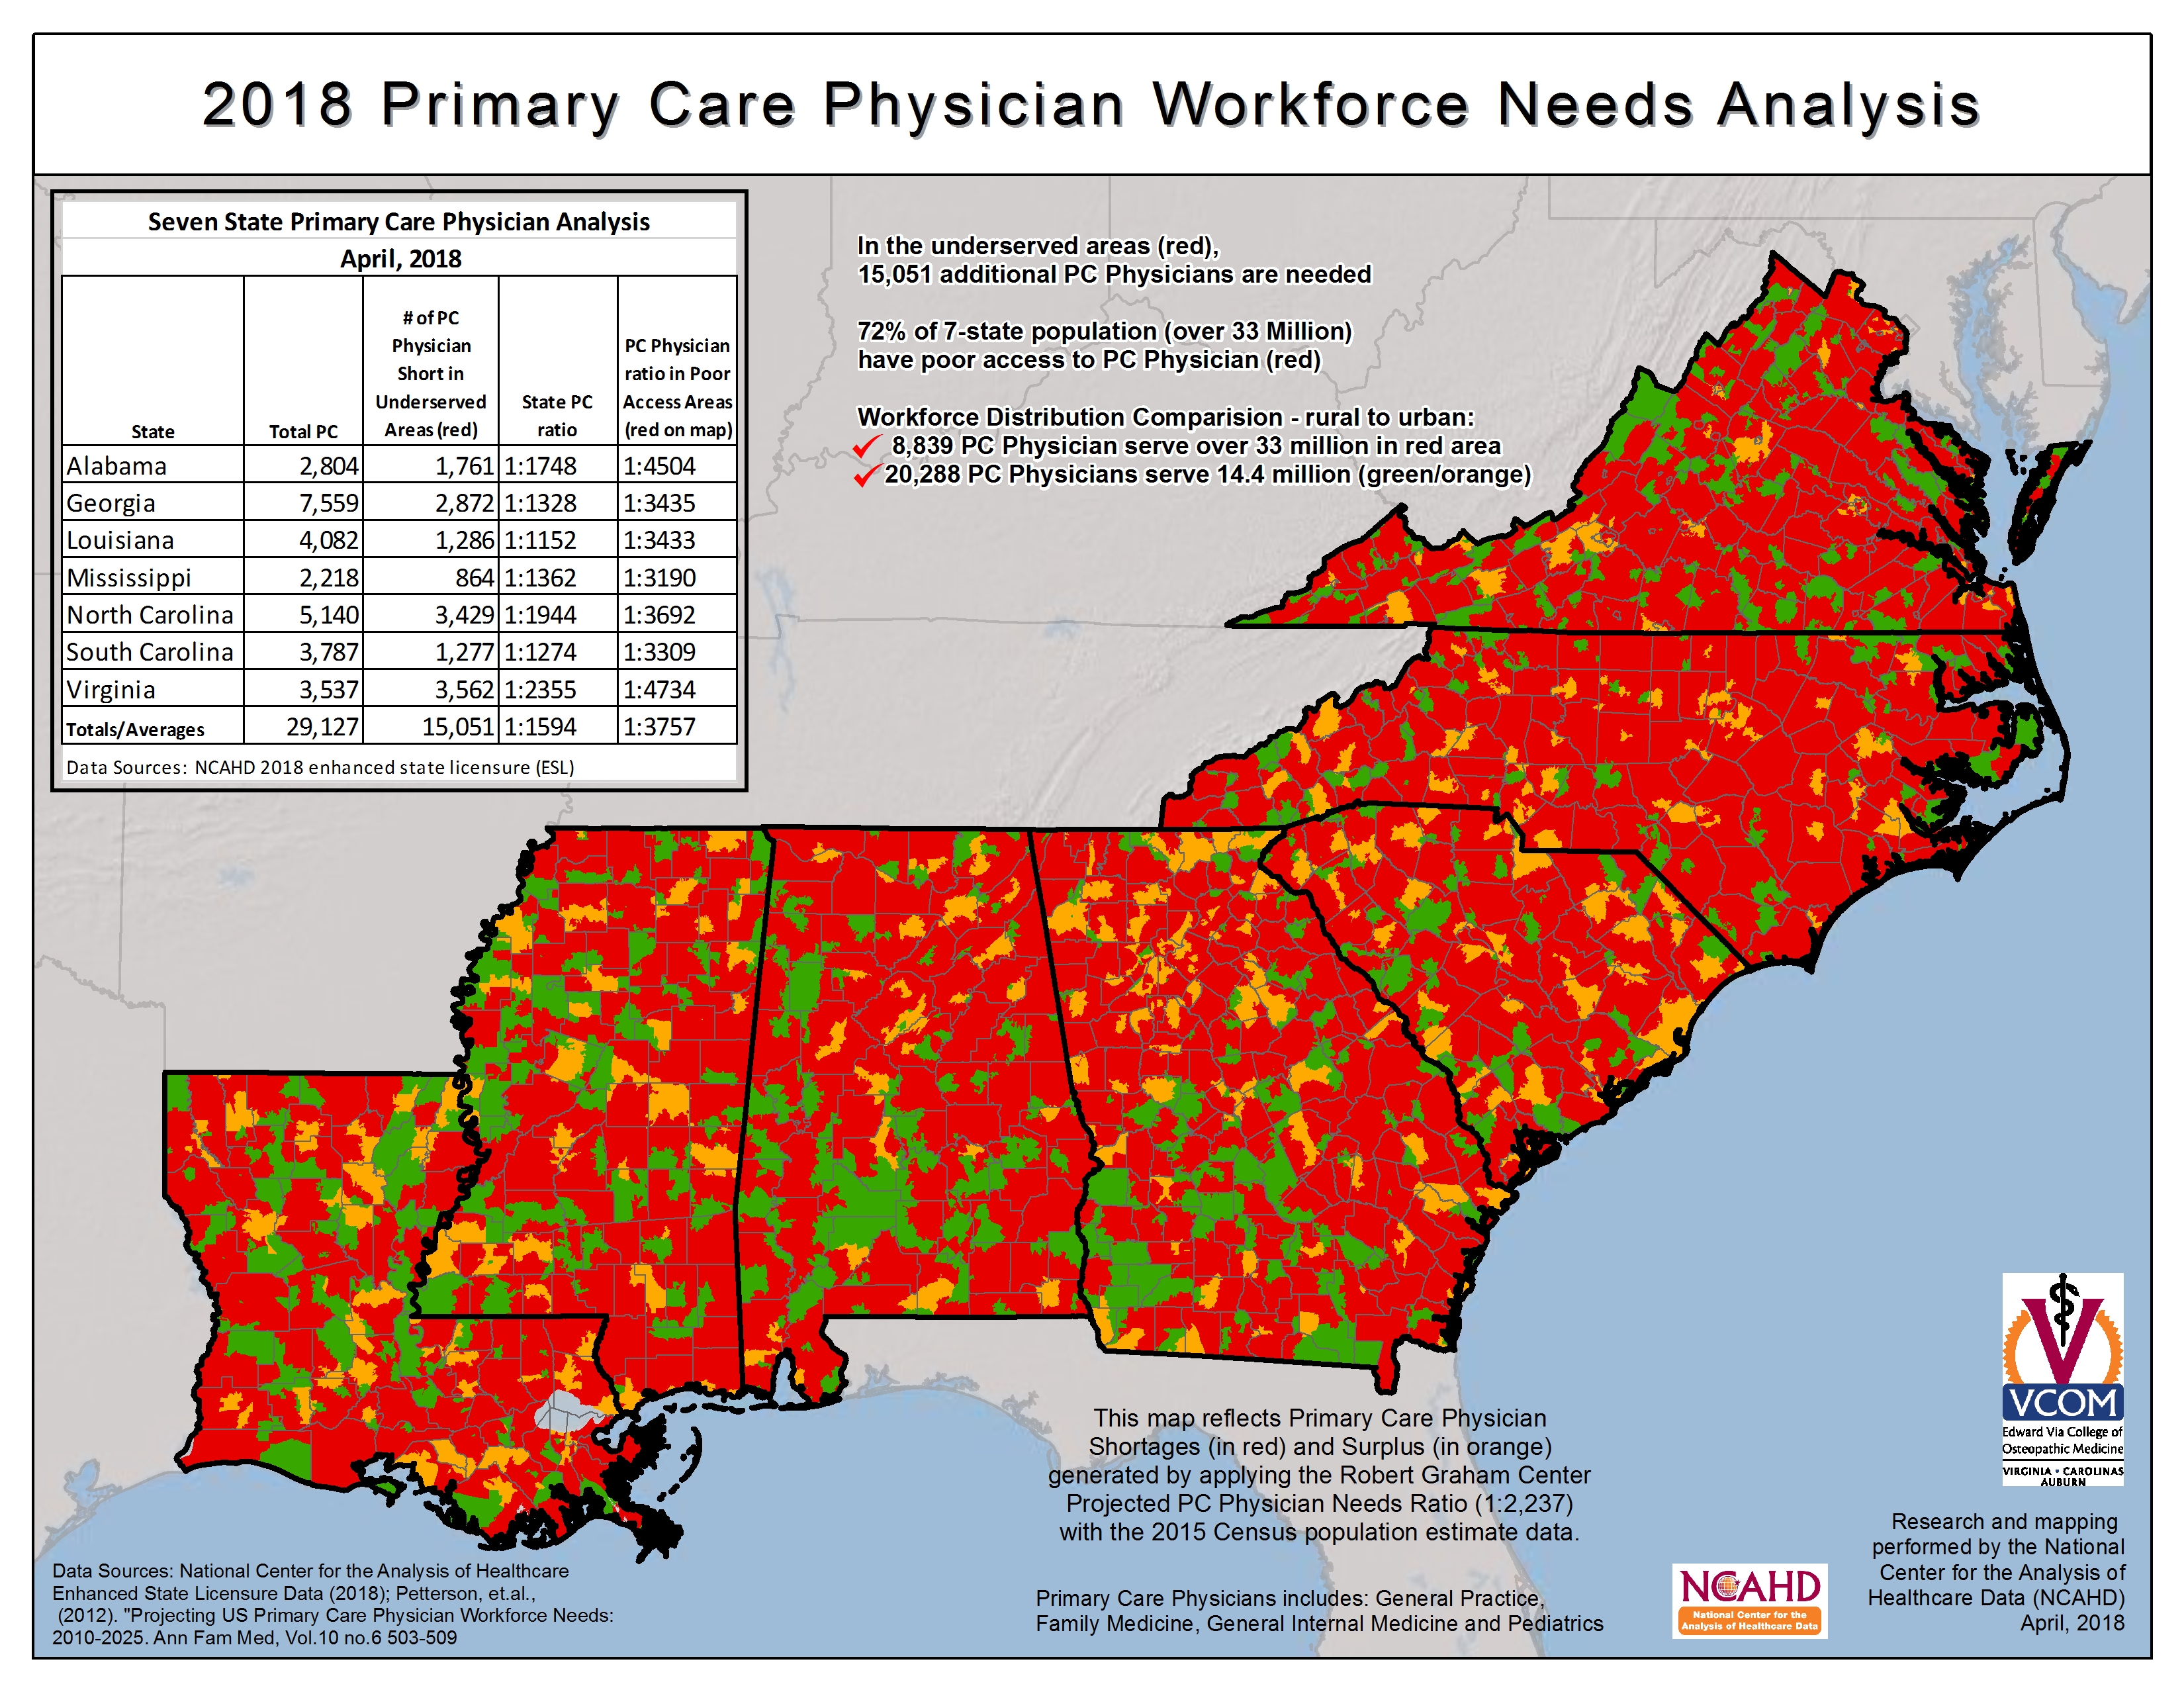 Primary Care Physician Mal-Distribution for the Lower Appalachian States